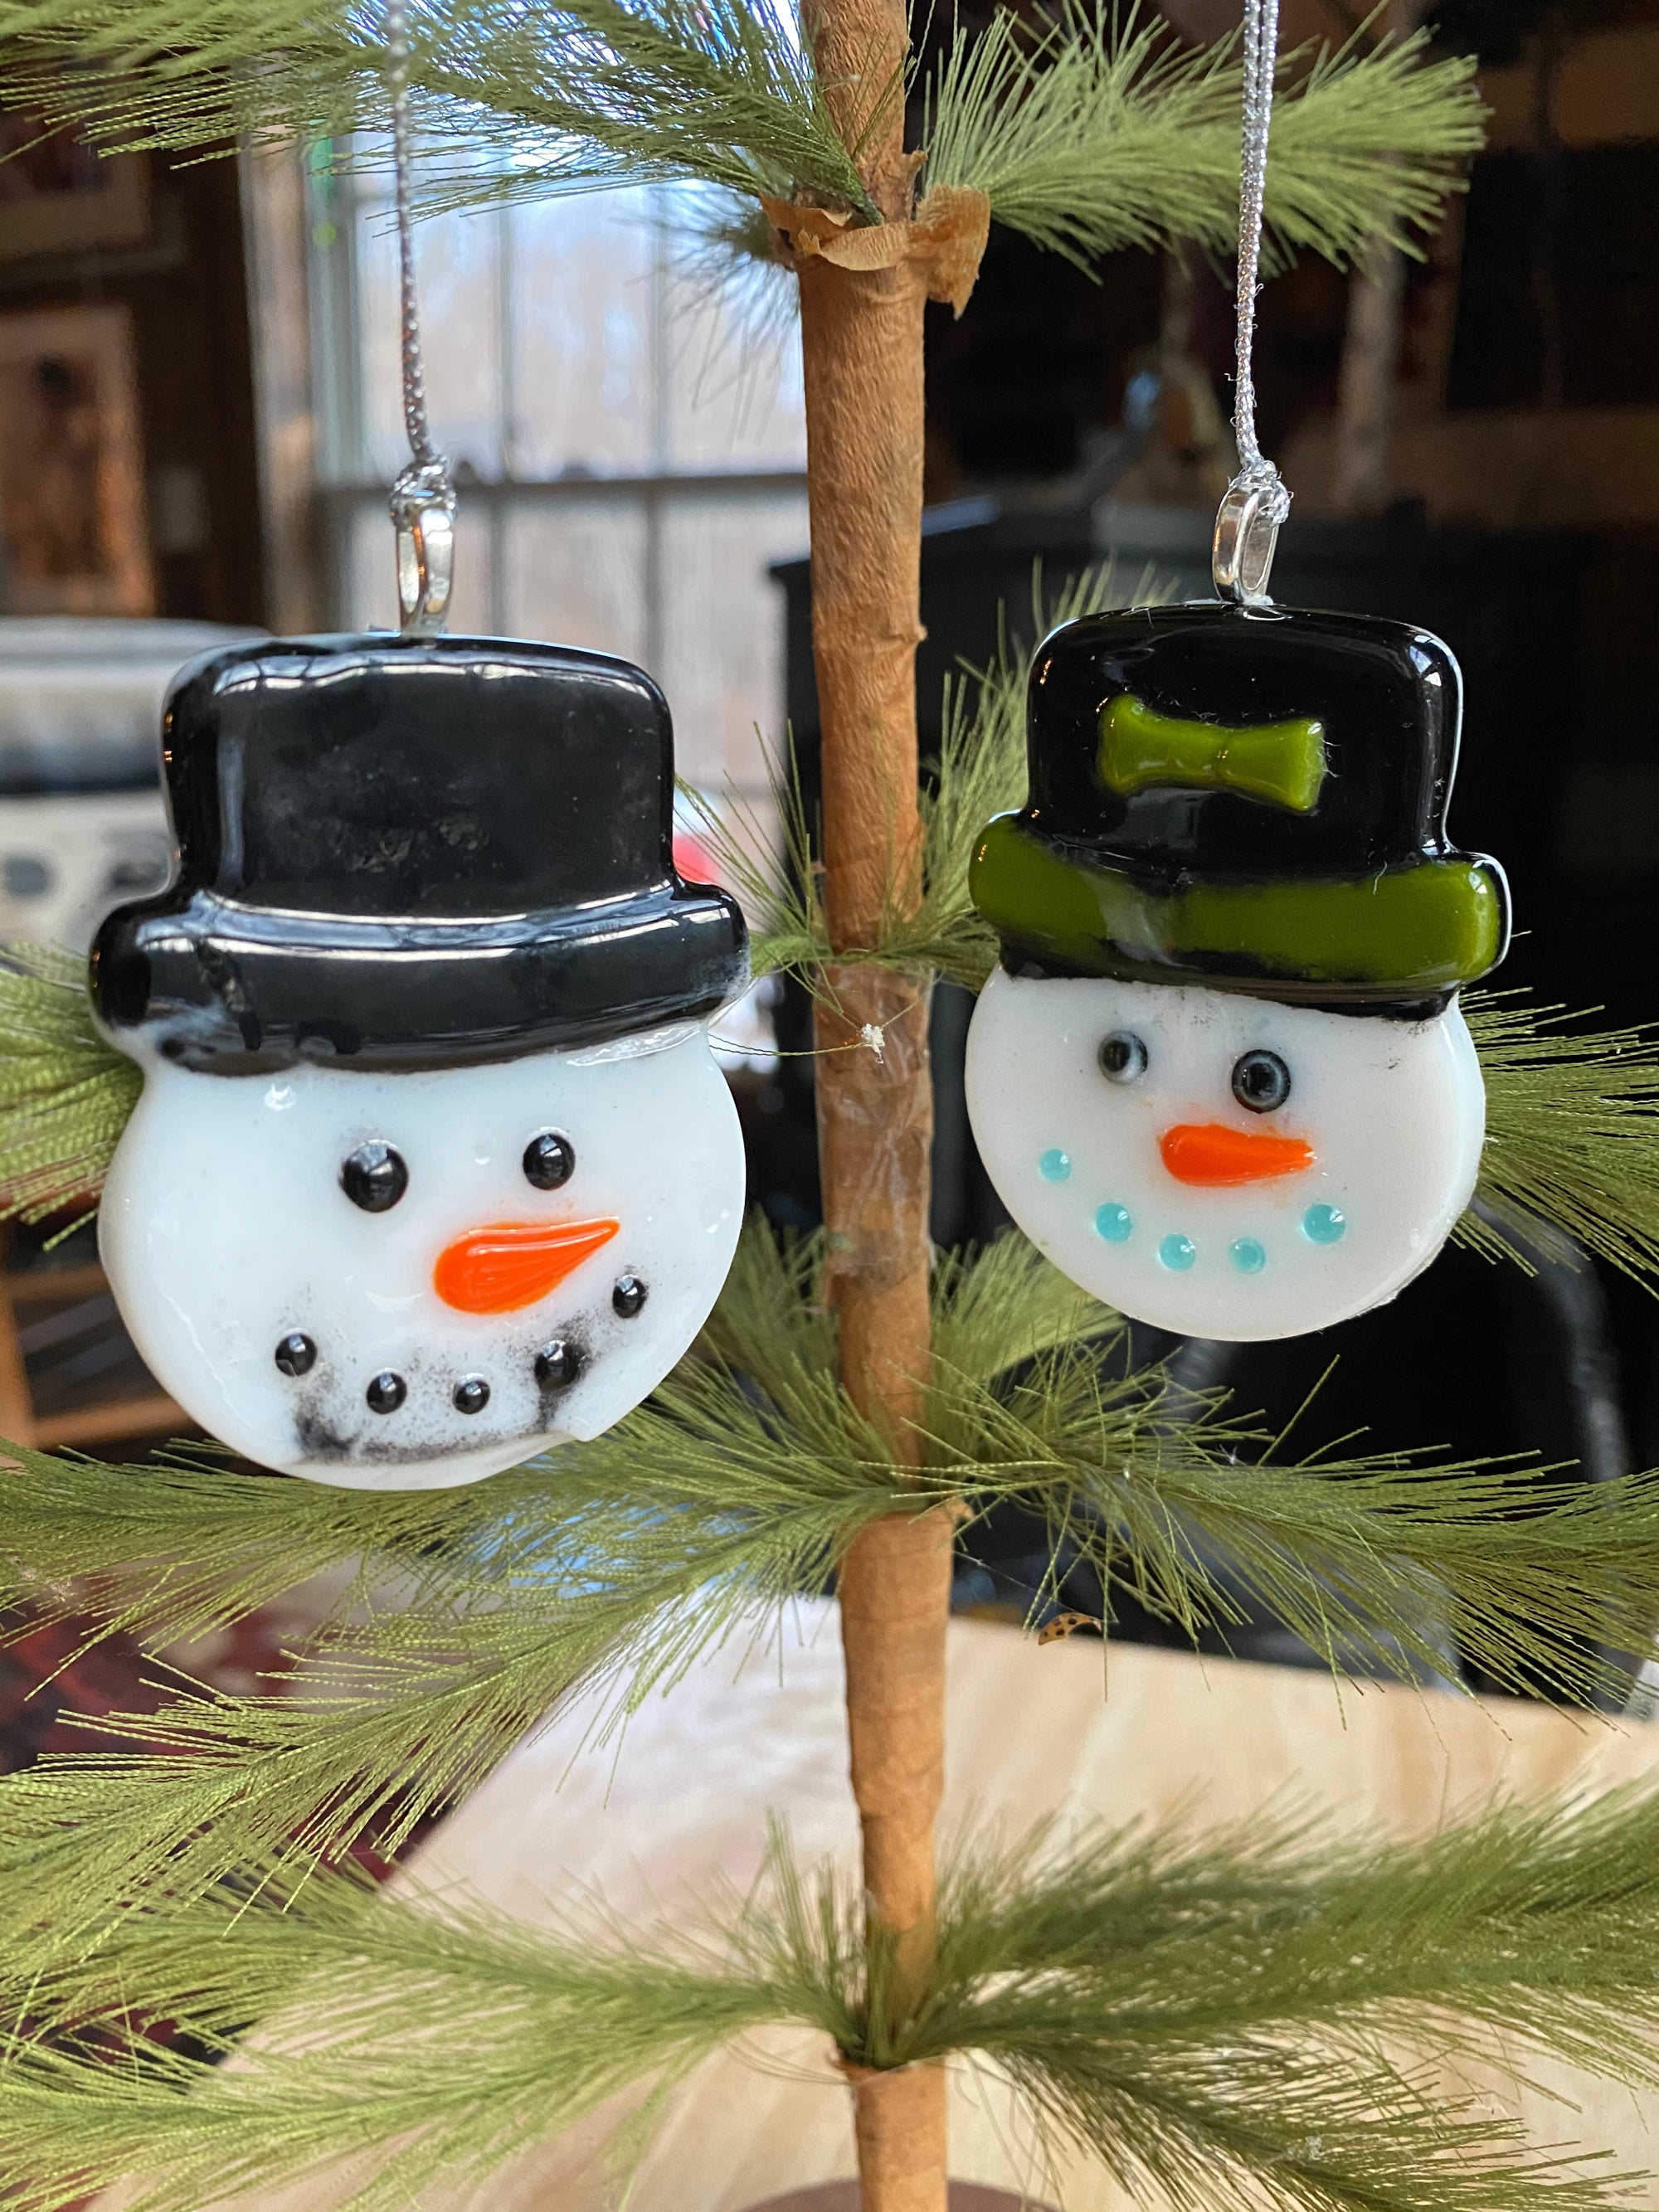 Snowman Face with Top Hat